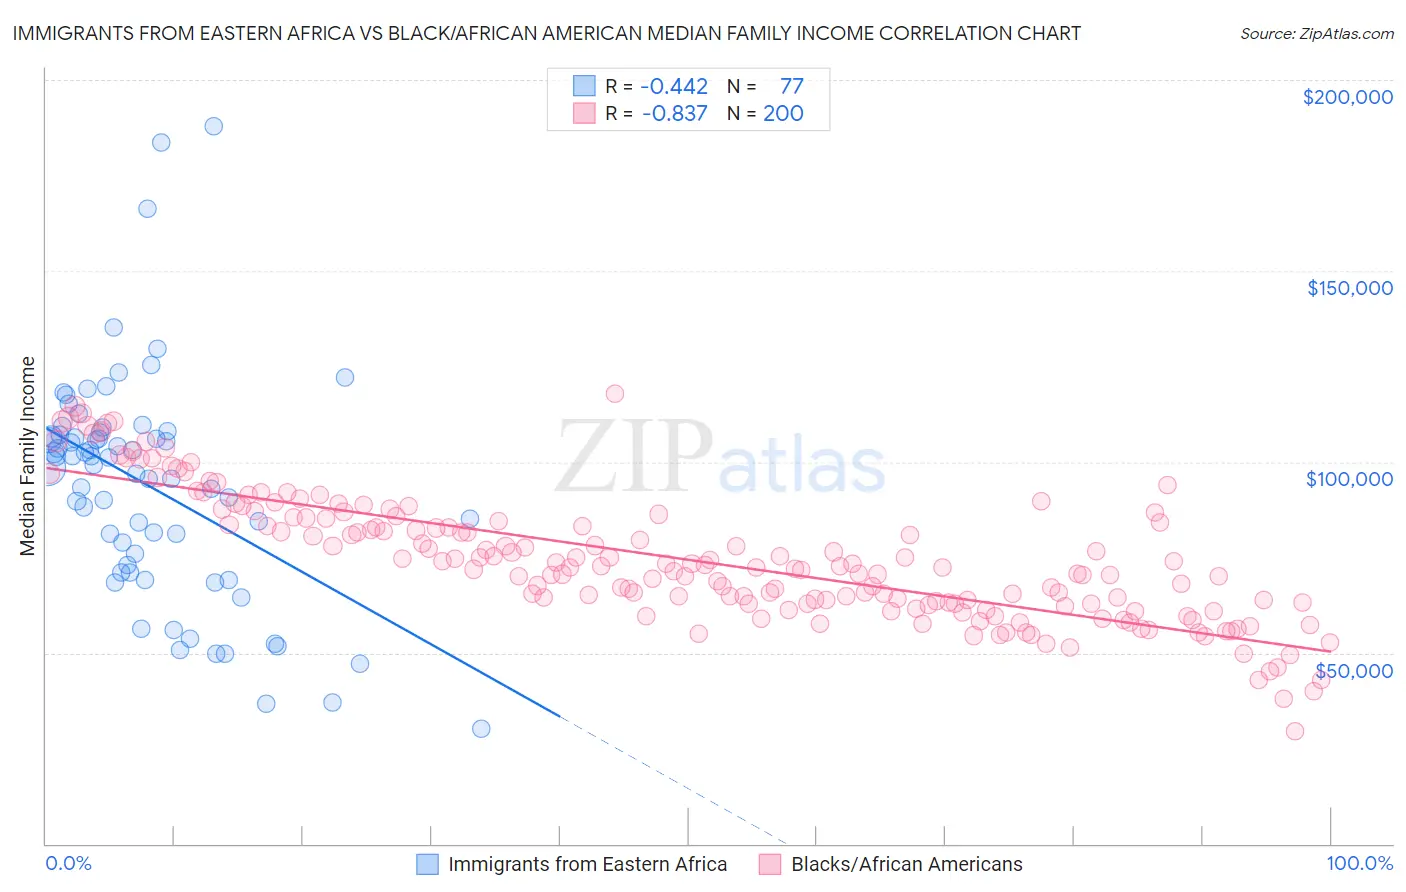 Immigrants from Eastern Africa vs Black/African American Median Family Income